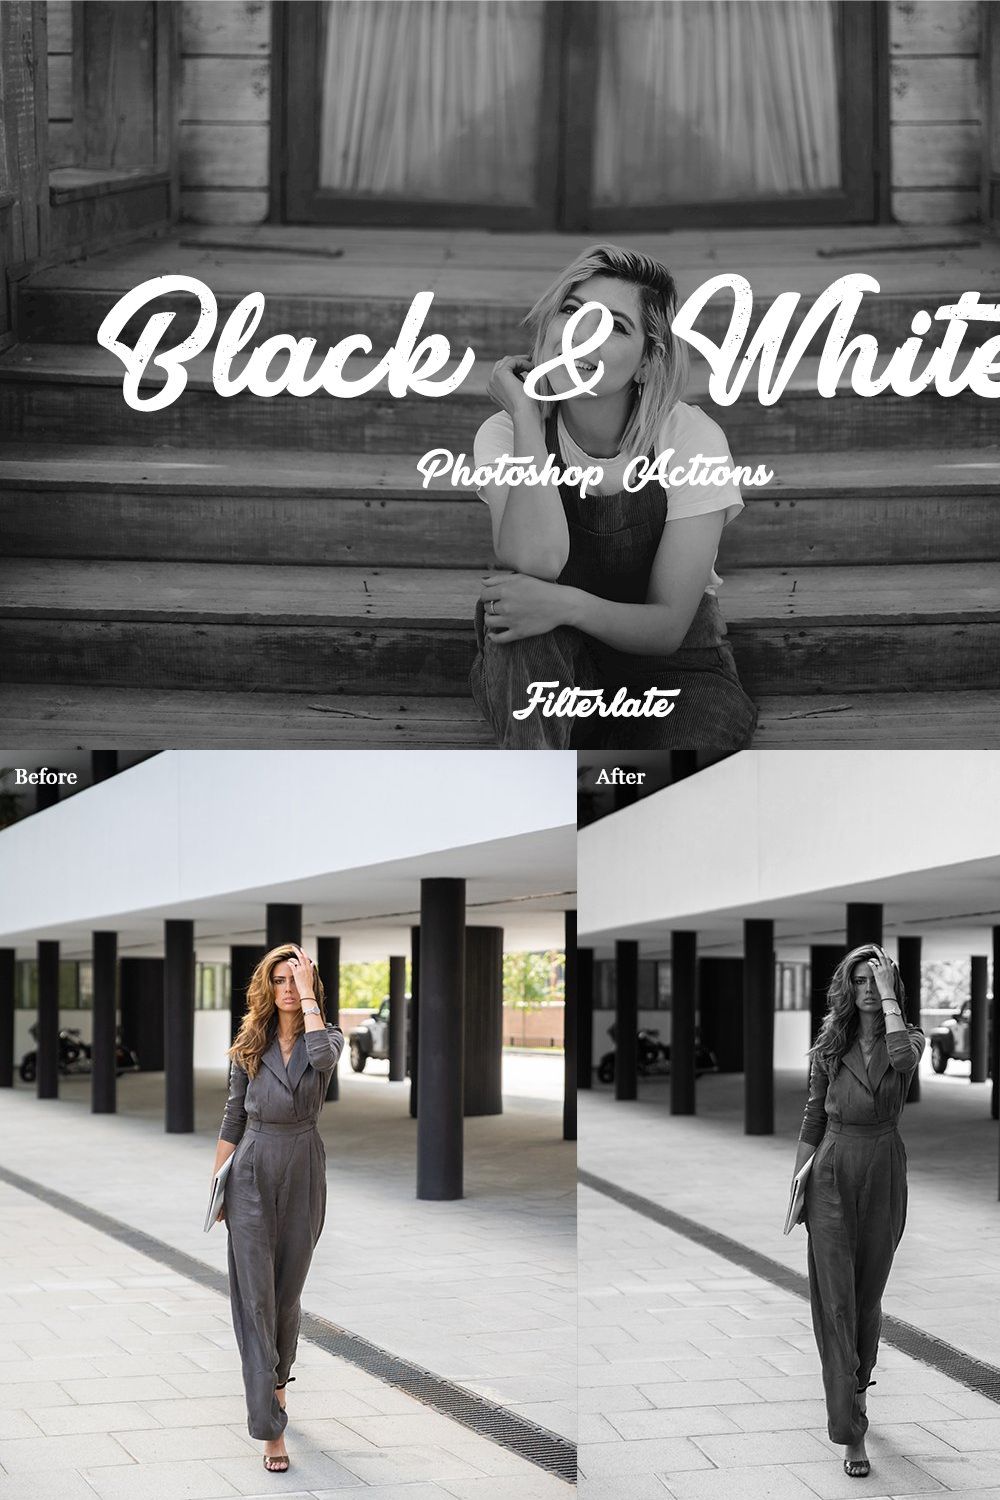 Black & White - Photoshop Actions pinterest preview image.